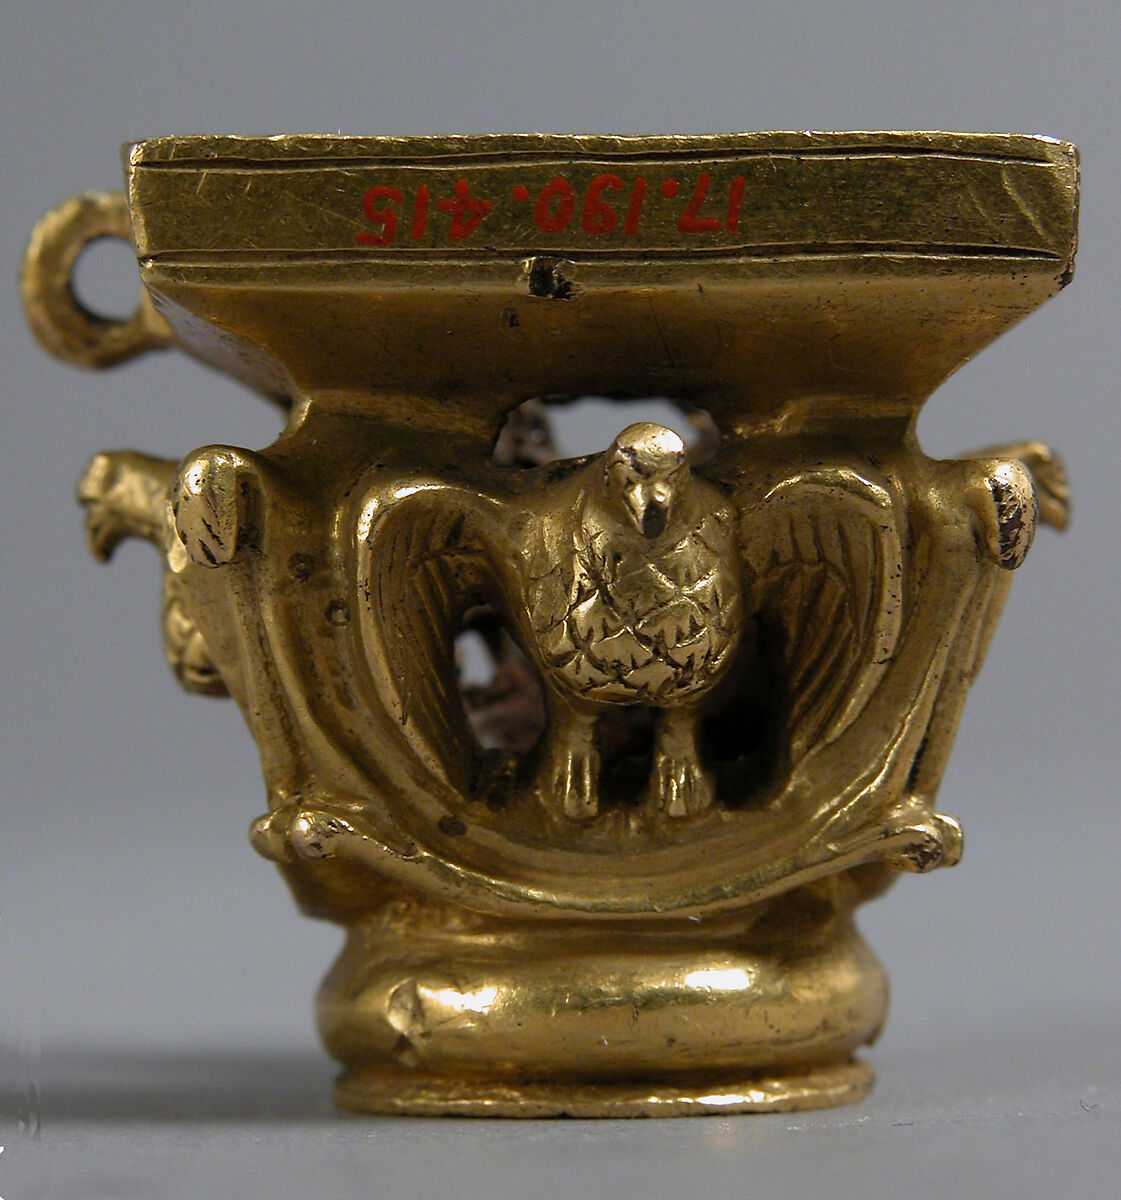 Capital from a Reliquary Shrine, Copper alloy, gilt, German 